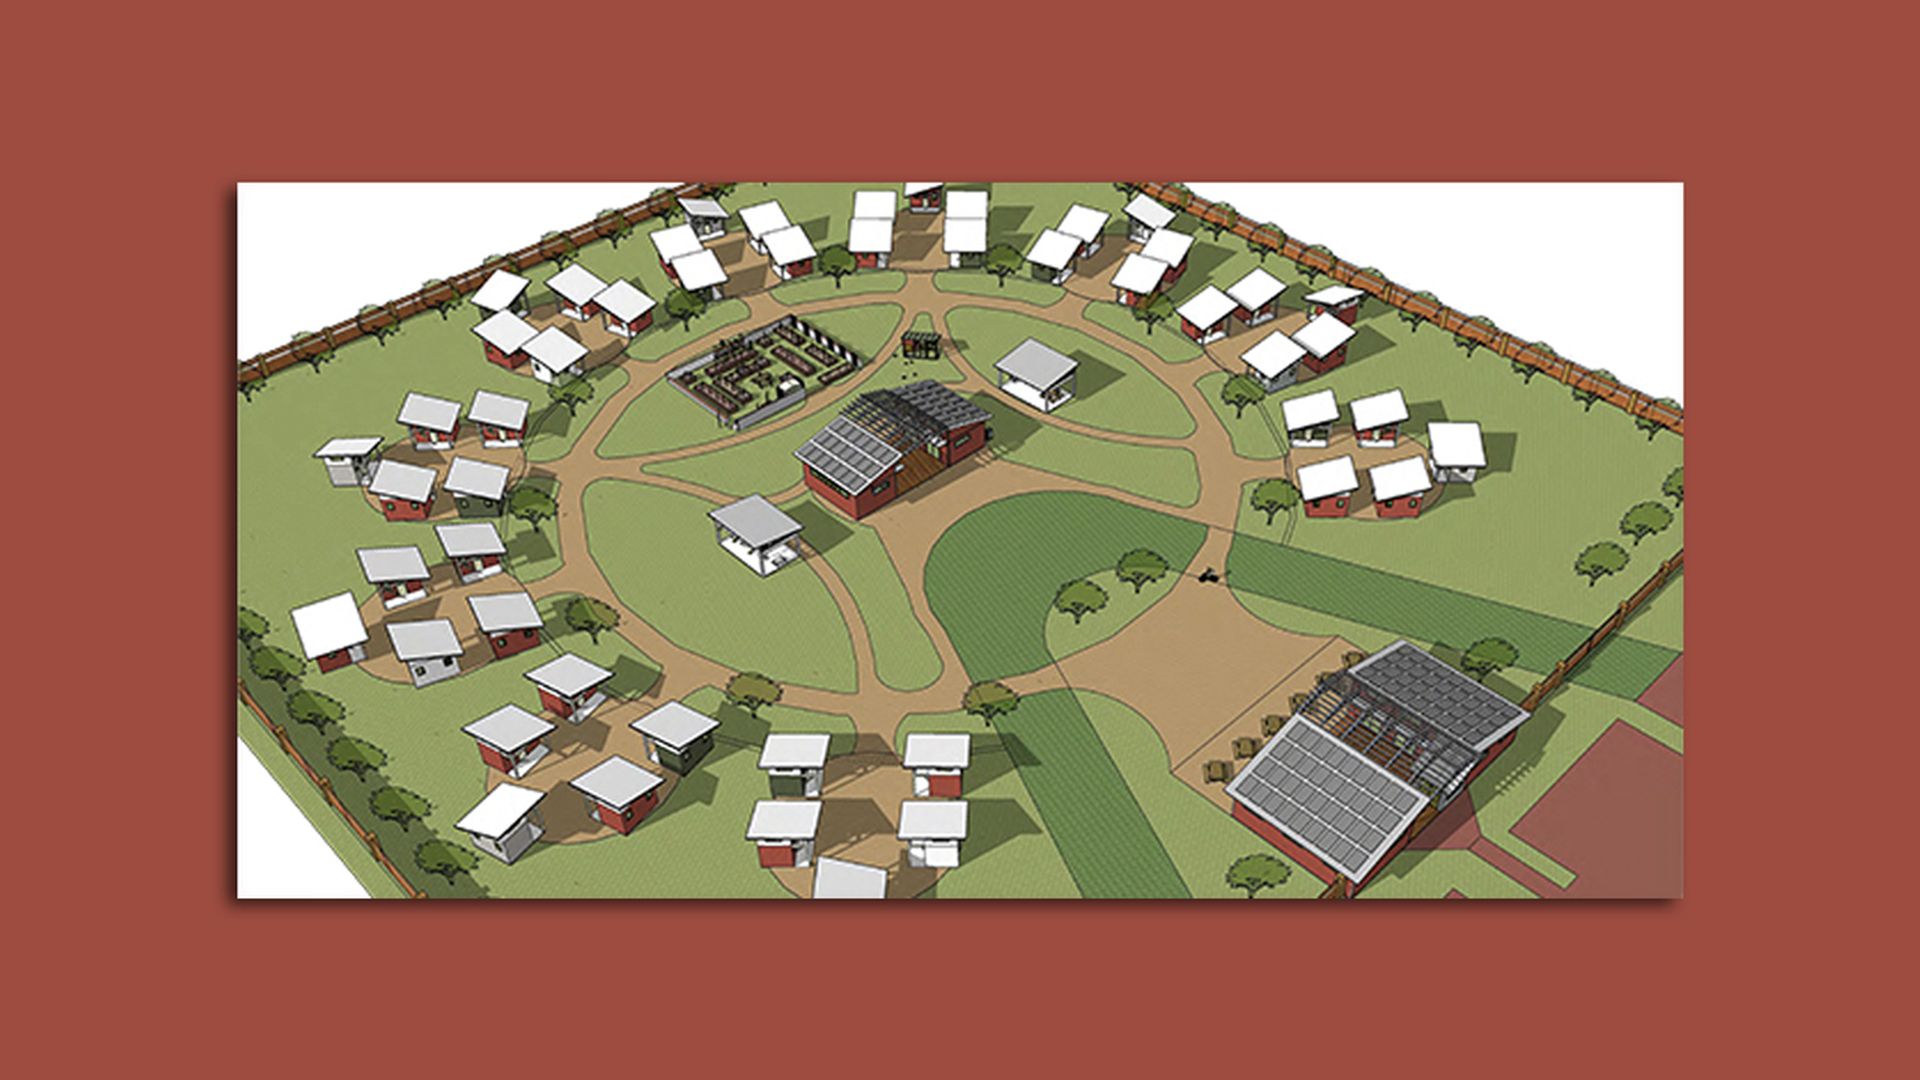 A drawing of a tiny home village proposed in Des Moines.